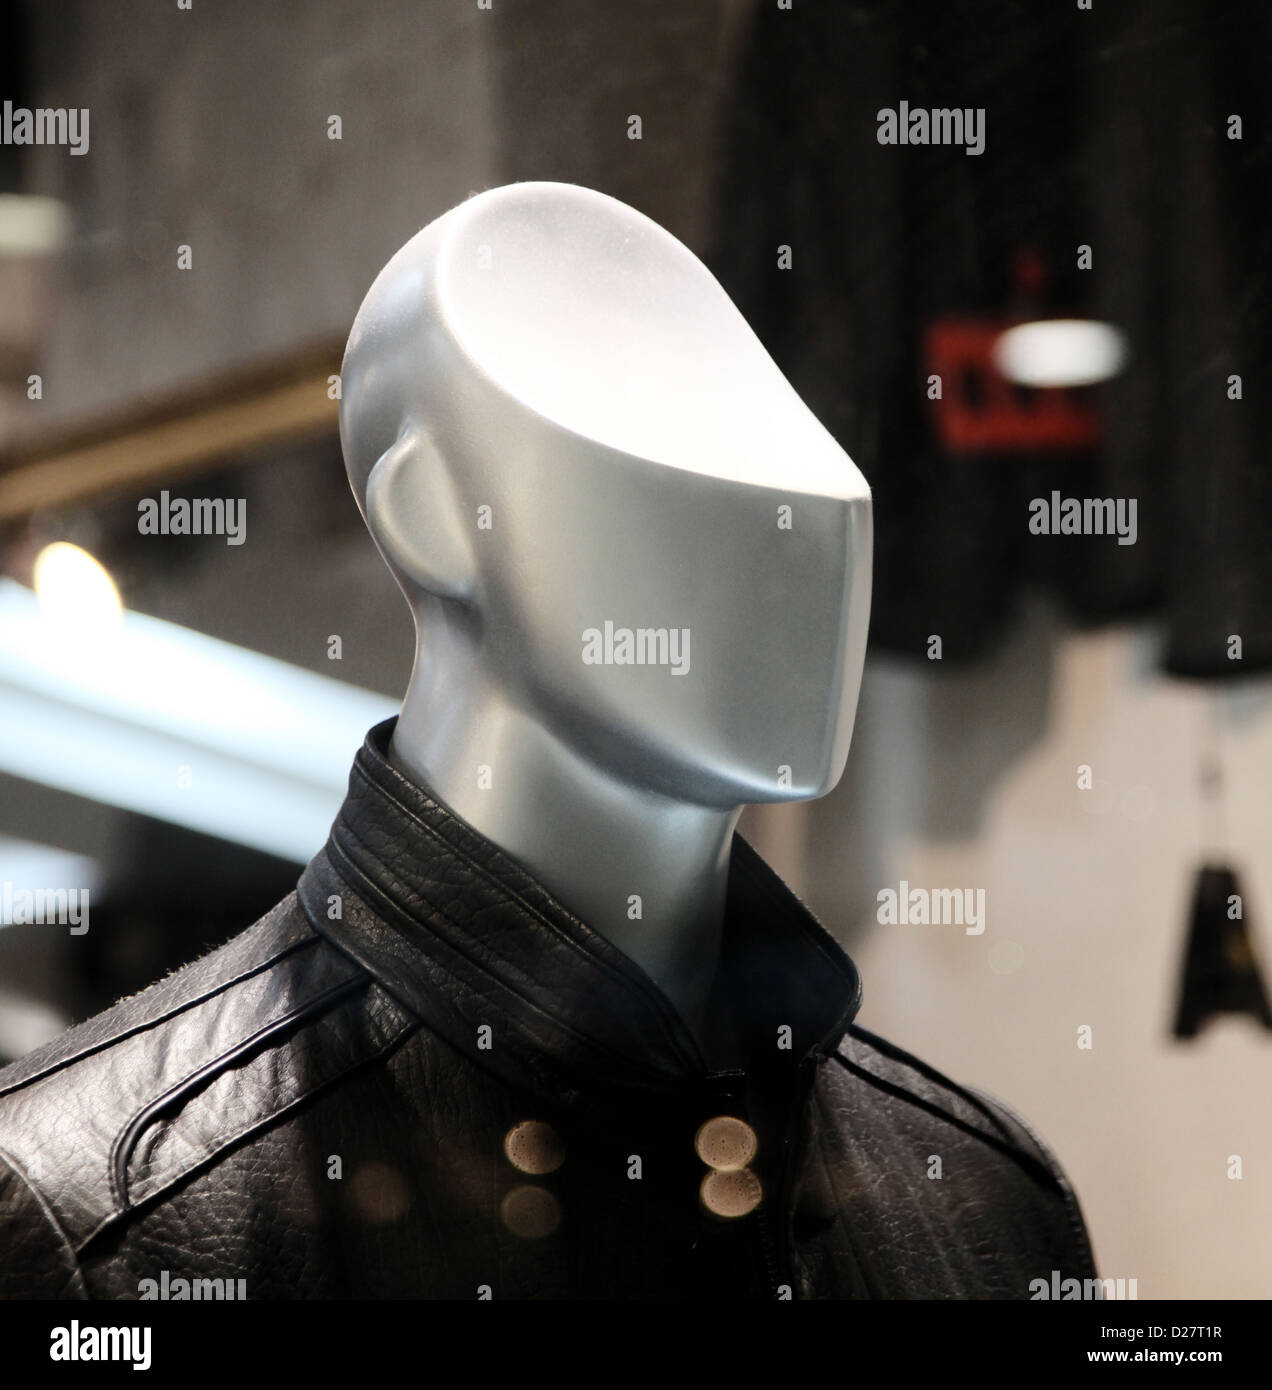 It's a photo of a close up of a male plastic model  in a fashion shop window. The head is cut like no brain. Stock Photo